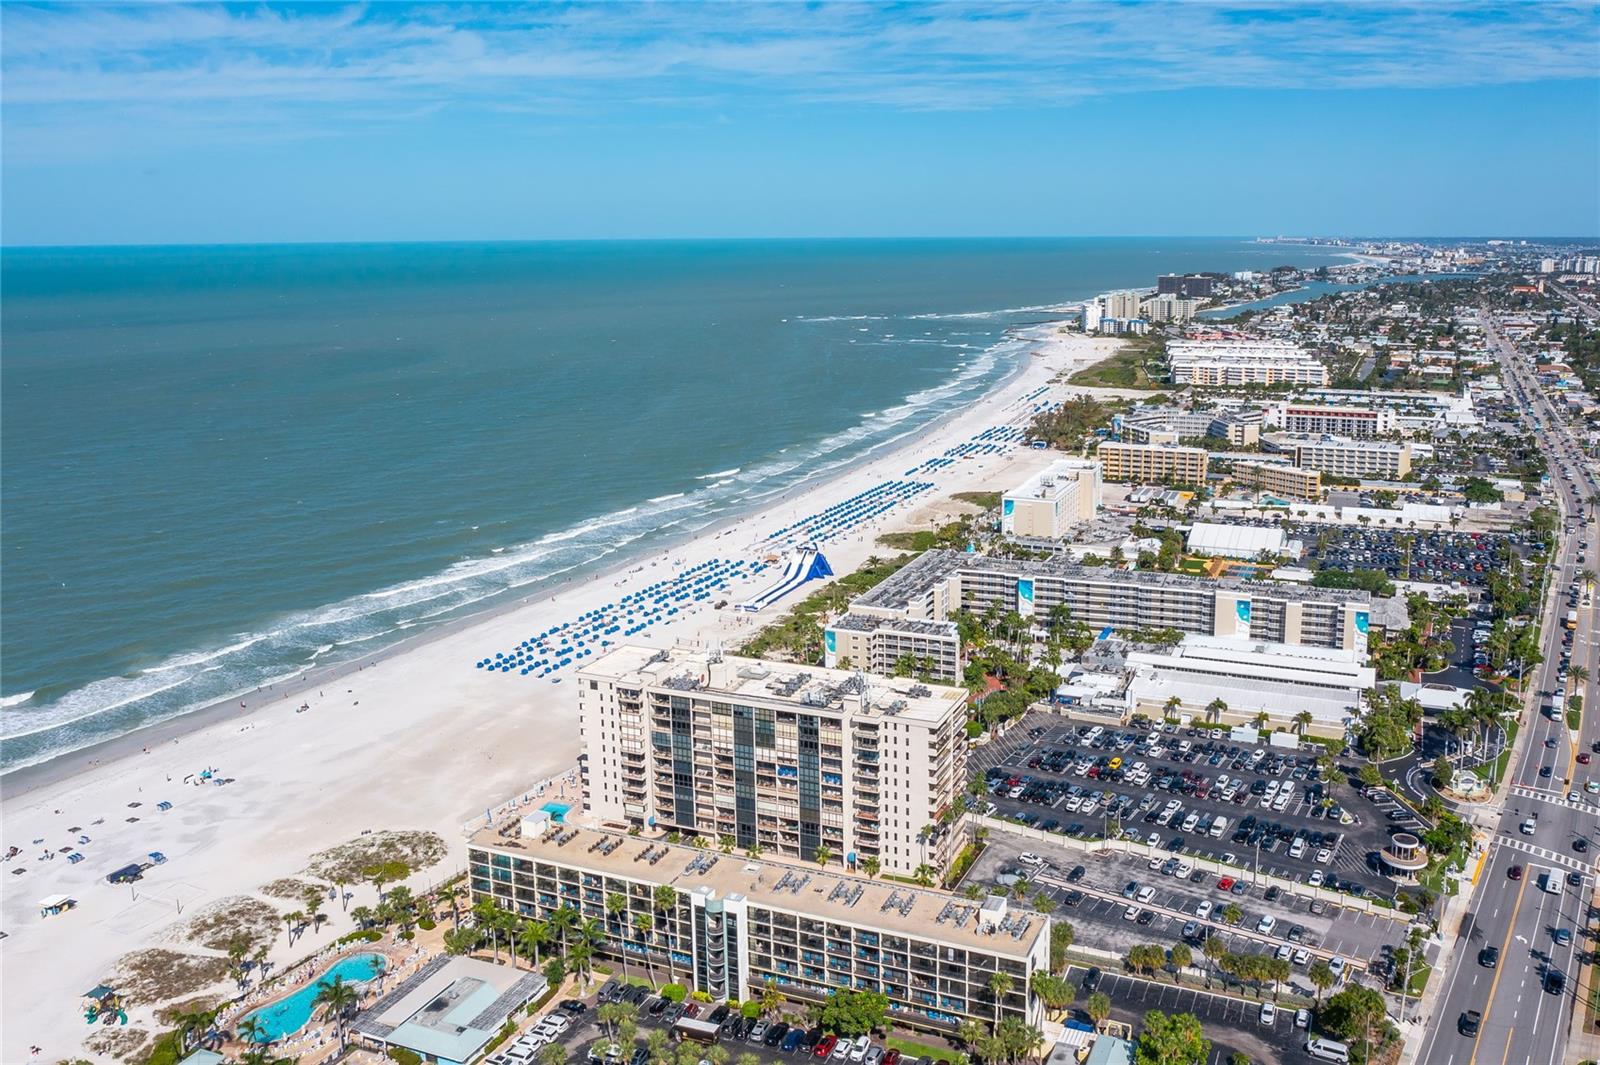 Seamark sits directly on the white sand beaches of St. Pete Beach.